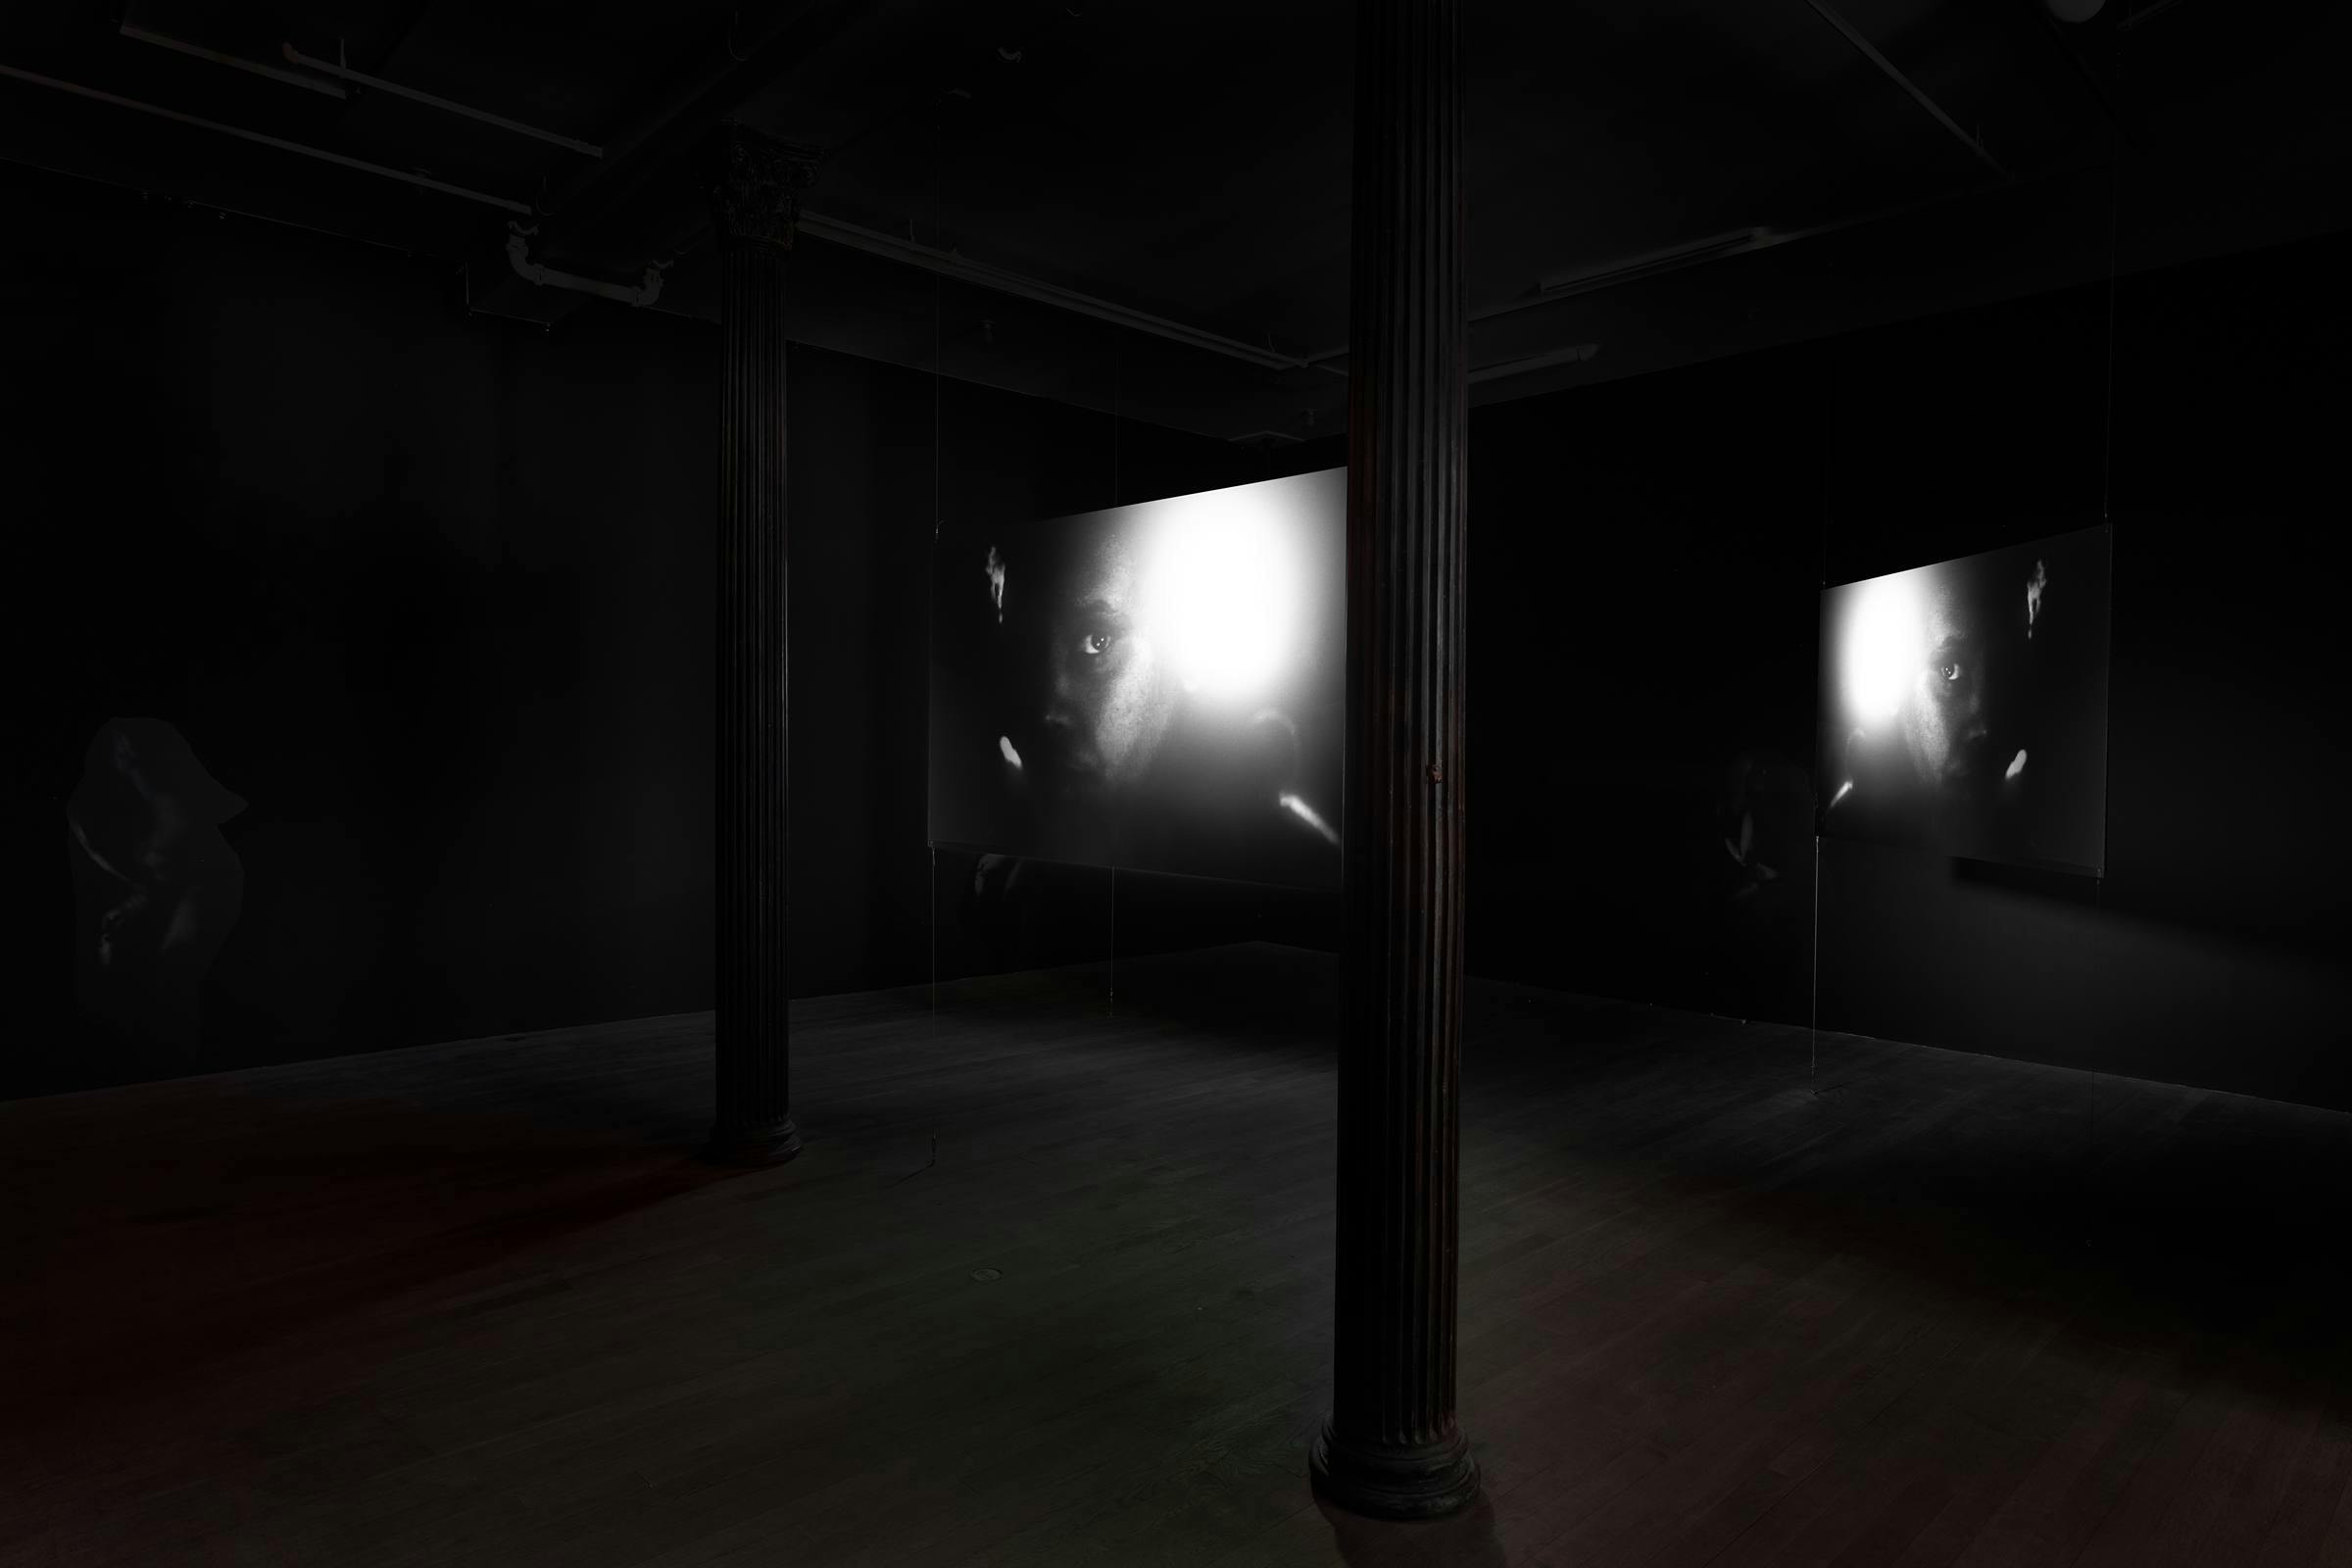 Two screens show faces in black and white in a gallery space with columns in it.